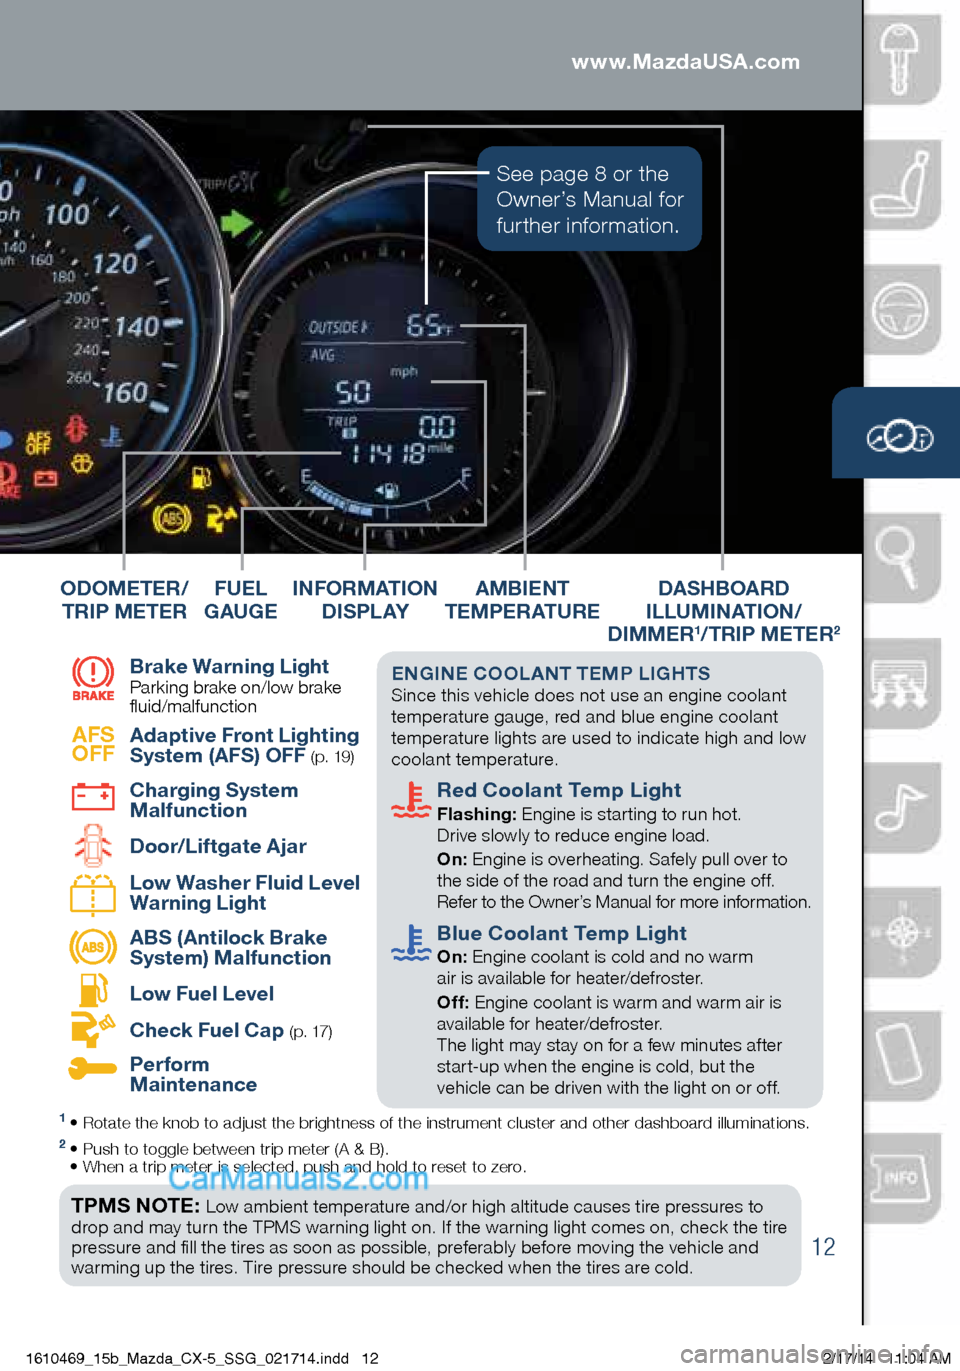 MAZDA MODEL CX-5 2015  Smart Start Guide (in English) DASHBOARD 
ILLUMINATION/  
DIMMER
1/TRIP METER2 
1  • Rotate the knob to adjust the brightness of the instrument cluster and\
 other dashboard illuminations.2 • Push to toggle between trip meter (